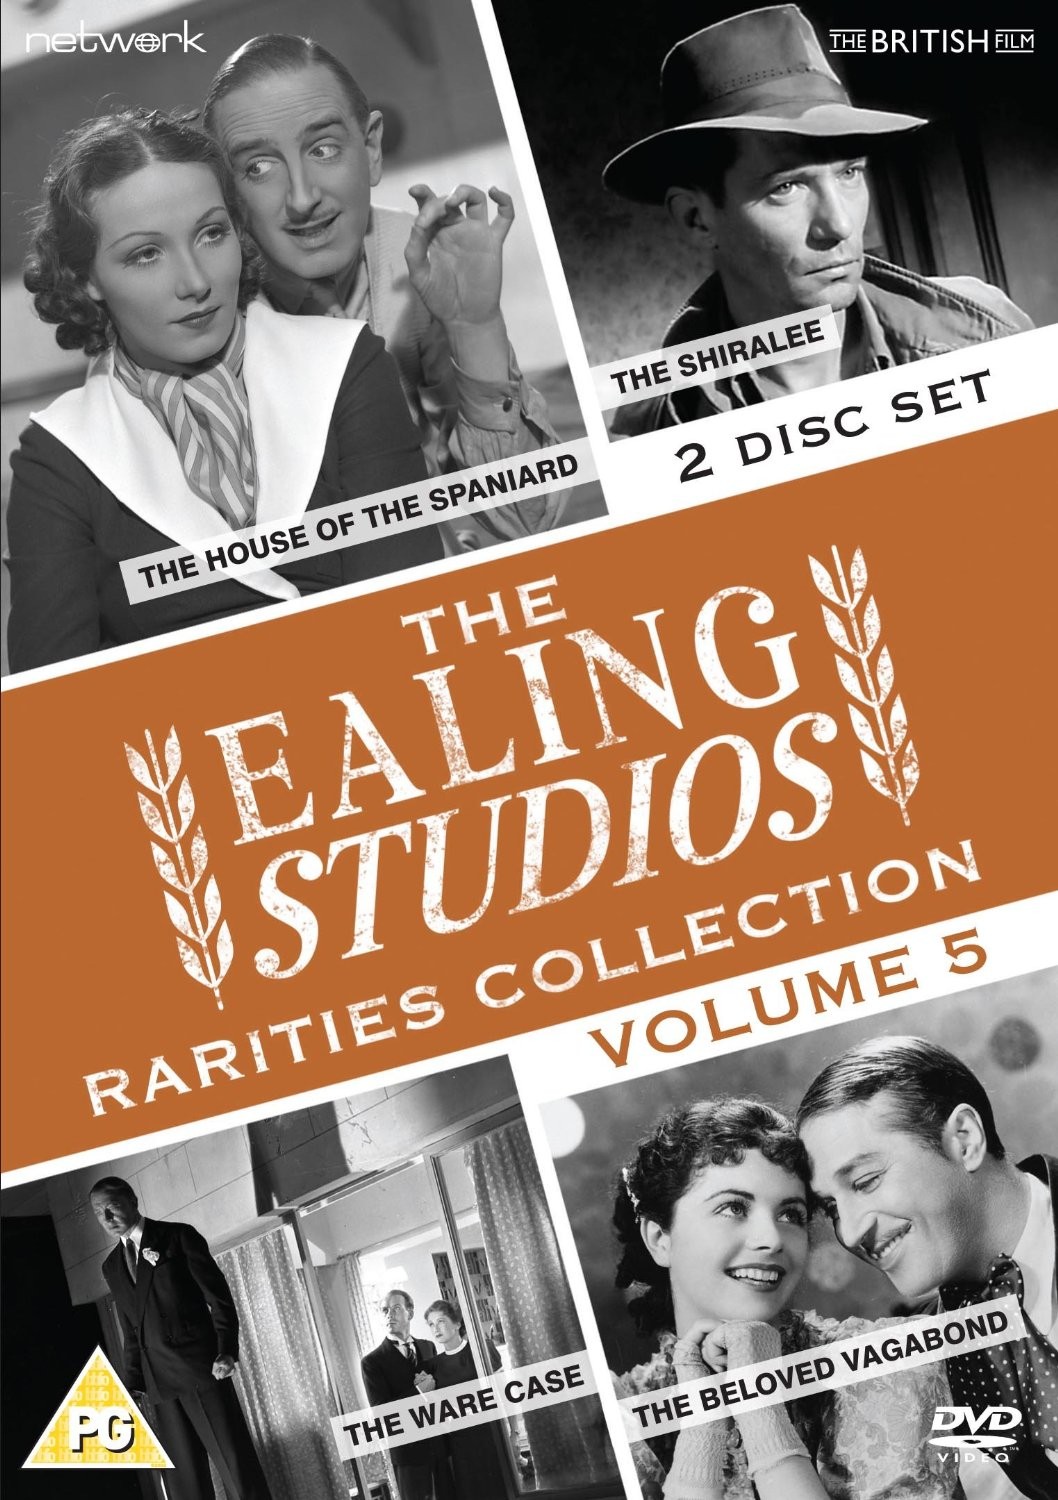 The Ealing Studios Rarities Collection DVD – Volume 5 from Network as part of the British Film collection. Features The House of the Spaniard, The Shiralee, The Ware Case, The Beloved Vagabond